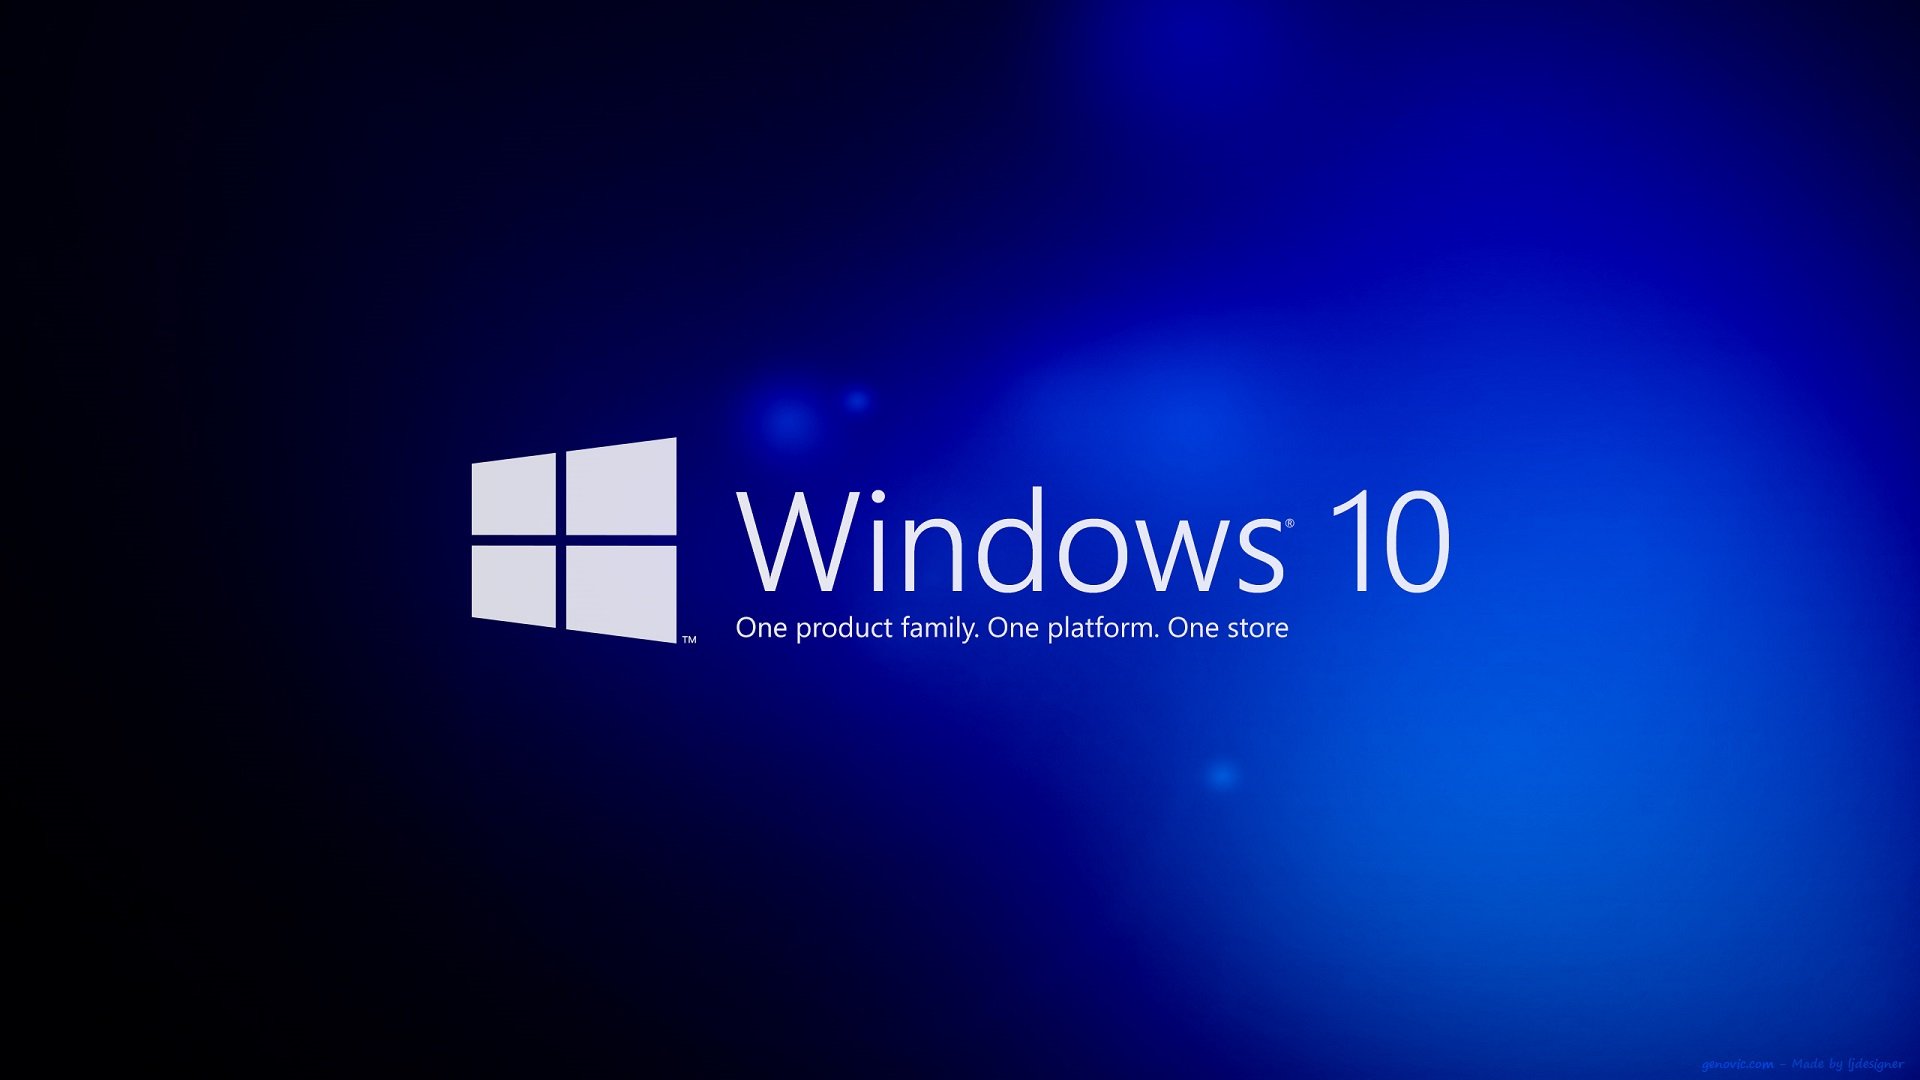 Windows Logo Wallpaper and Theme Pack All for Windows Free